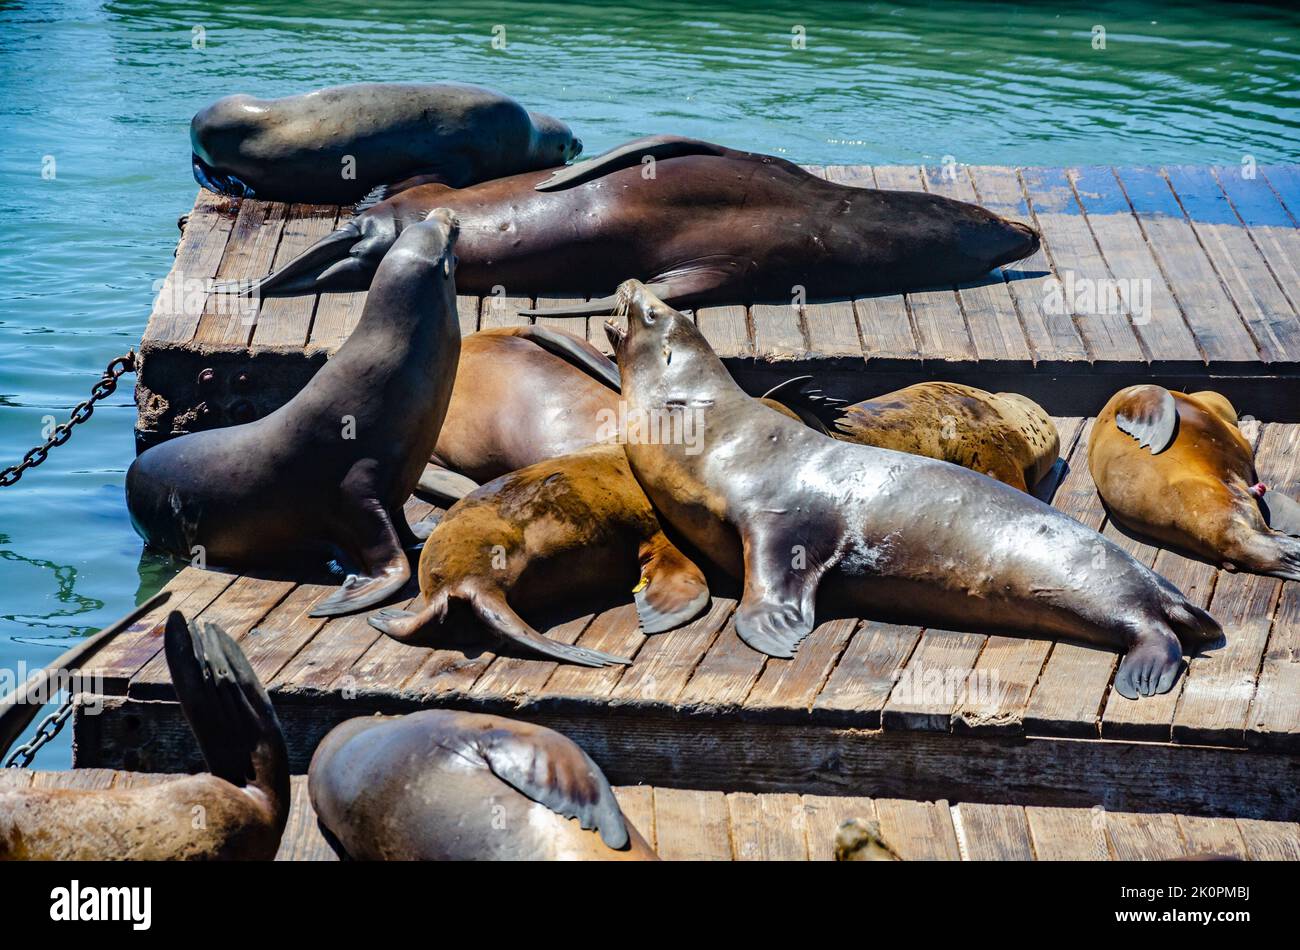 Wild seal sunbathing on wooden pontoons in the harbour at Pier 39 in San Francisco, California, USA Stock Photo